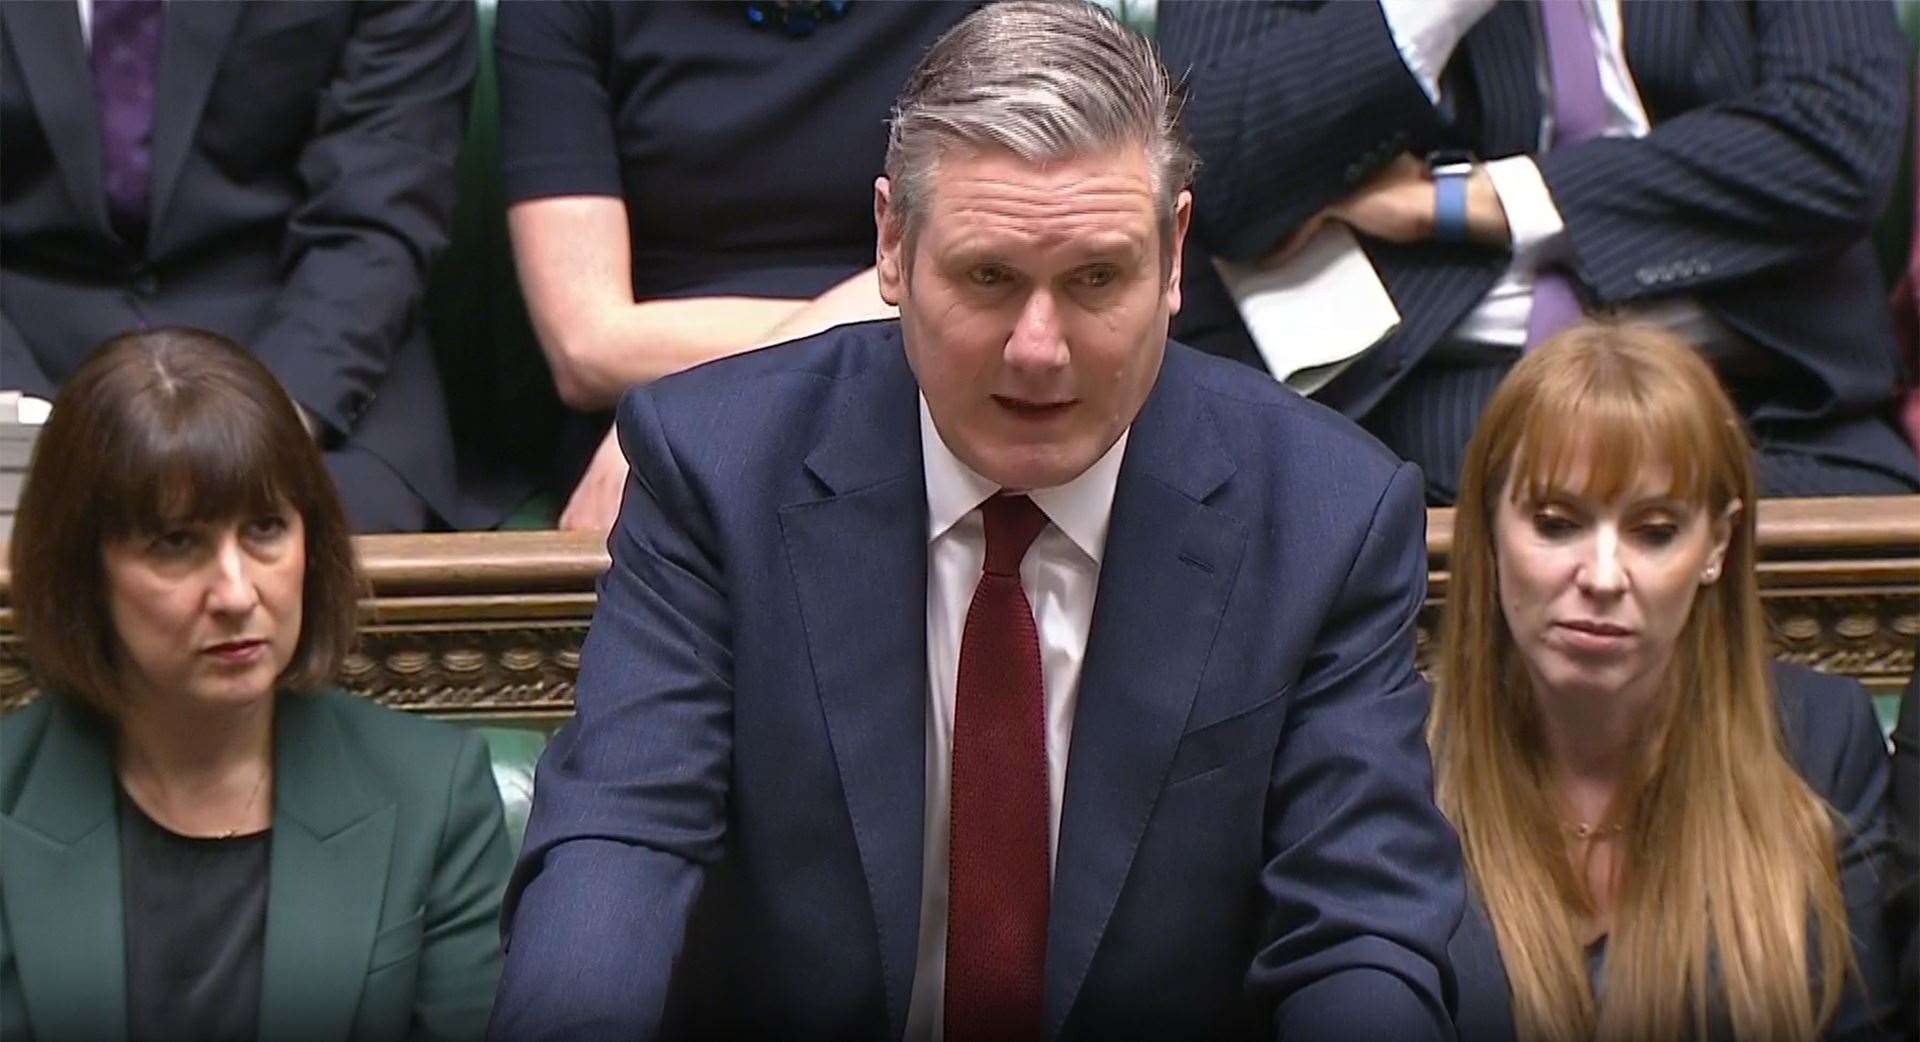 Labour leader Sir Keir Starmer questioned Rishi Sunak on the Rwanda deal during Prime Minister’s Questions on Wednesday (House of Commons/UK Parliament/PA)